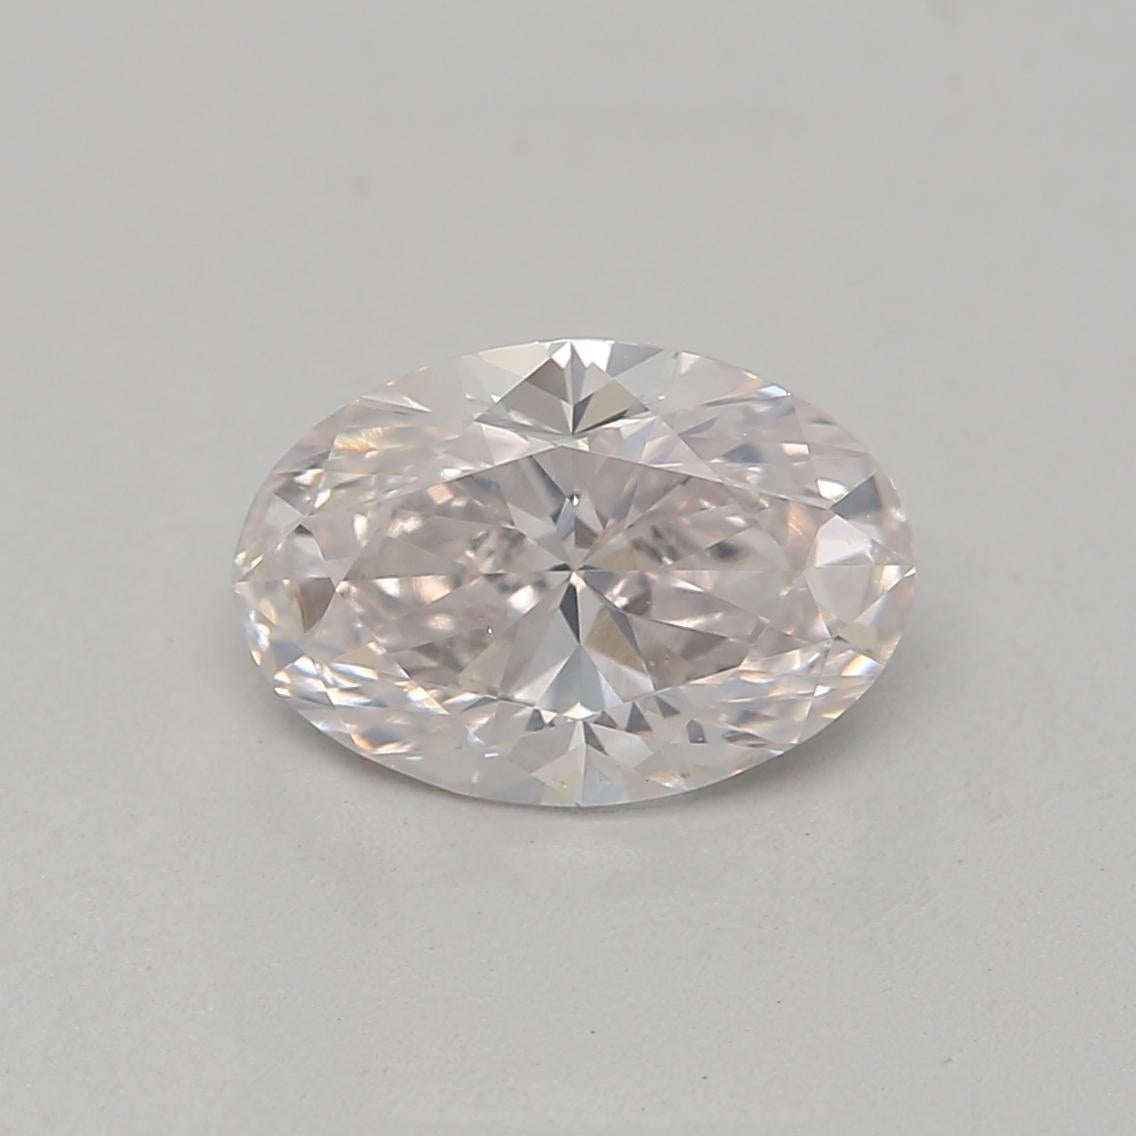 *100% NATURAL FANCY COLOUR DIAMOND*

✪ Diamond Details ✪

➛ Shape: Oval
➛ Colour Grade: Very Light Pink
➛ Carat: 0.70
➛ Clarity: SI1
➛ GIA Certified 

^FEATURES OF THE DIAMOND^

This 0.70 carat diamond is a relatively small diamond, with carat being